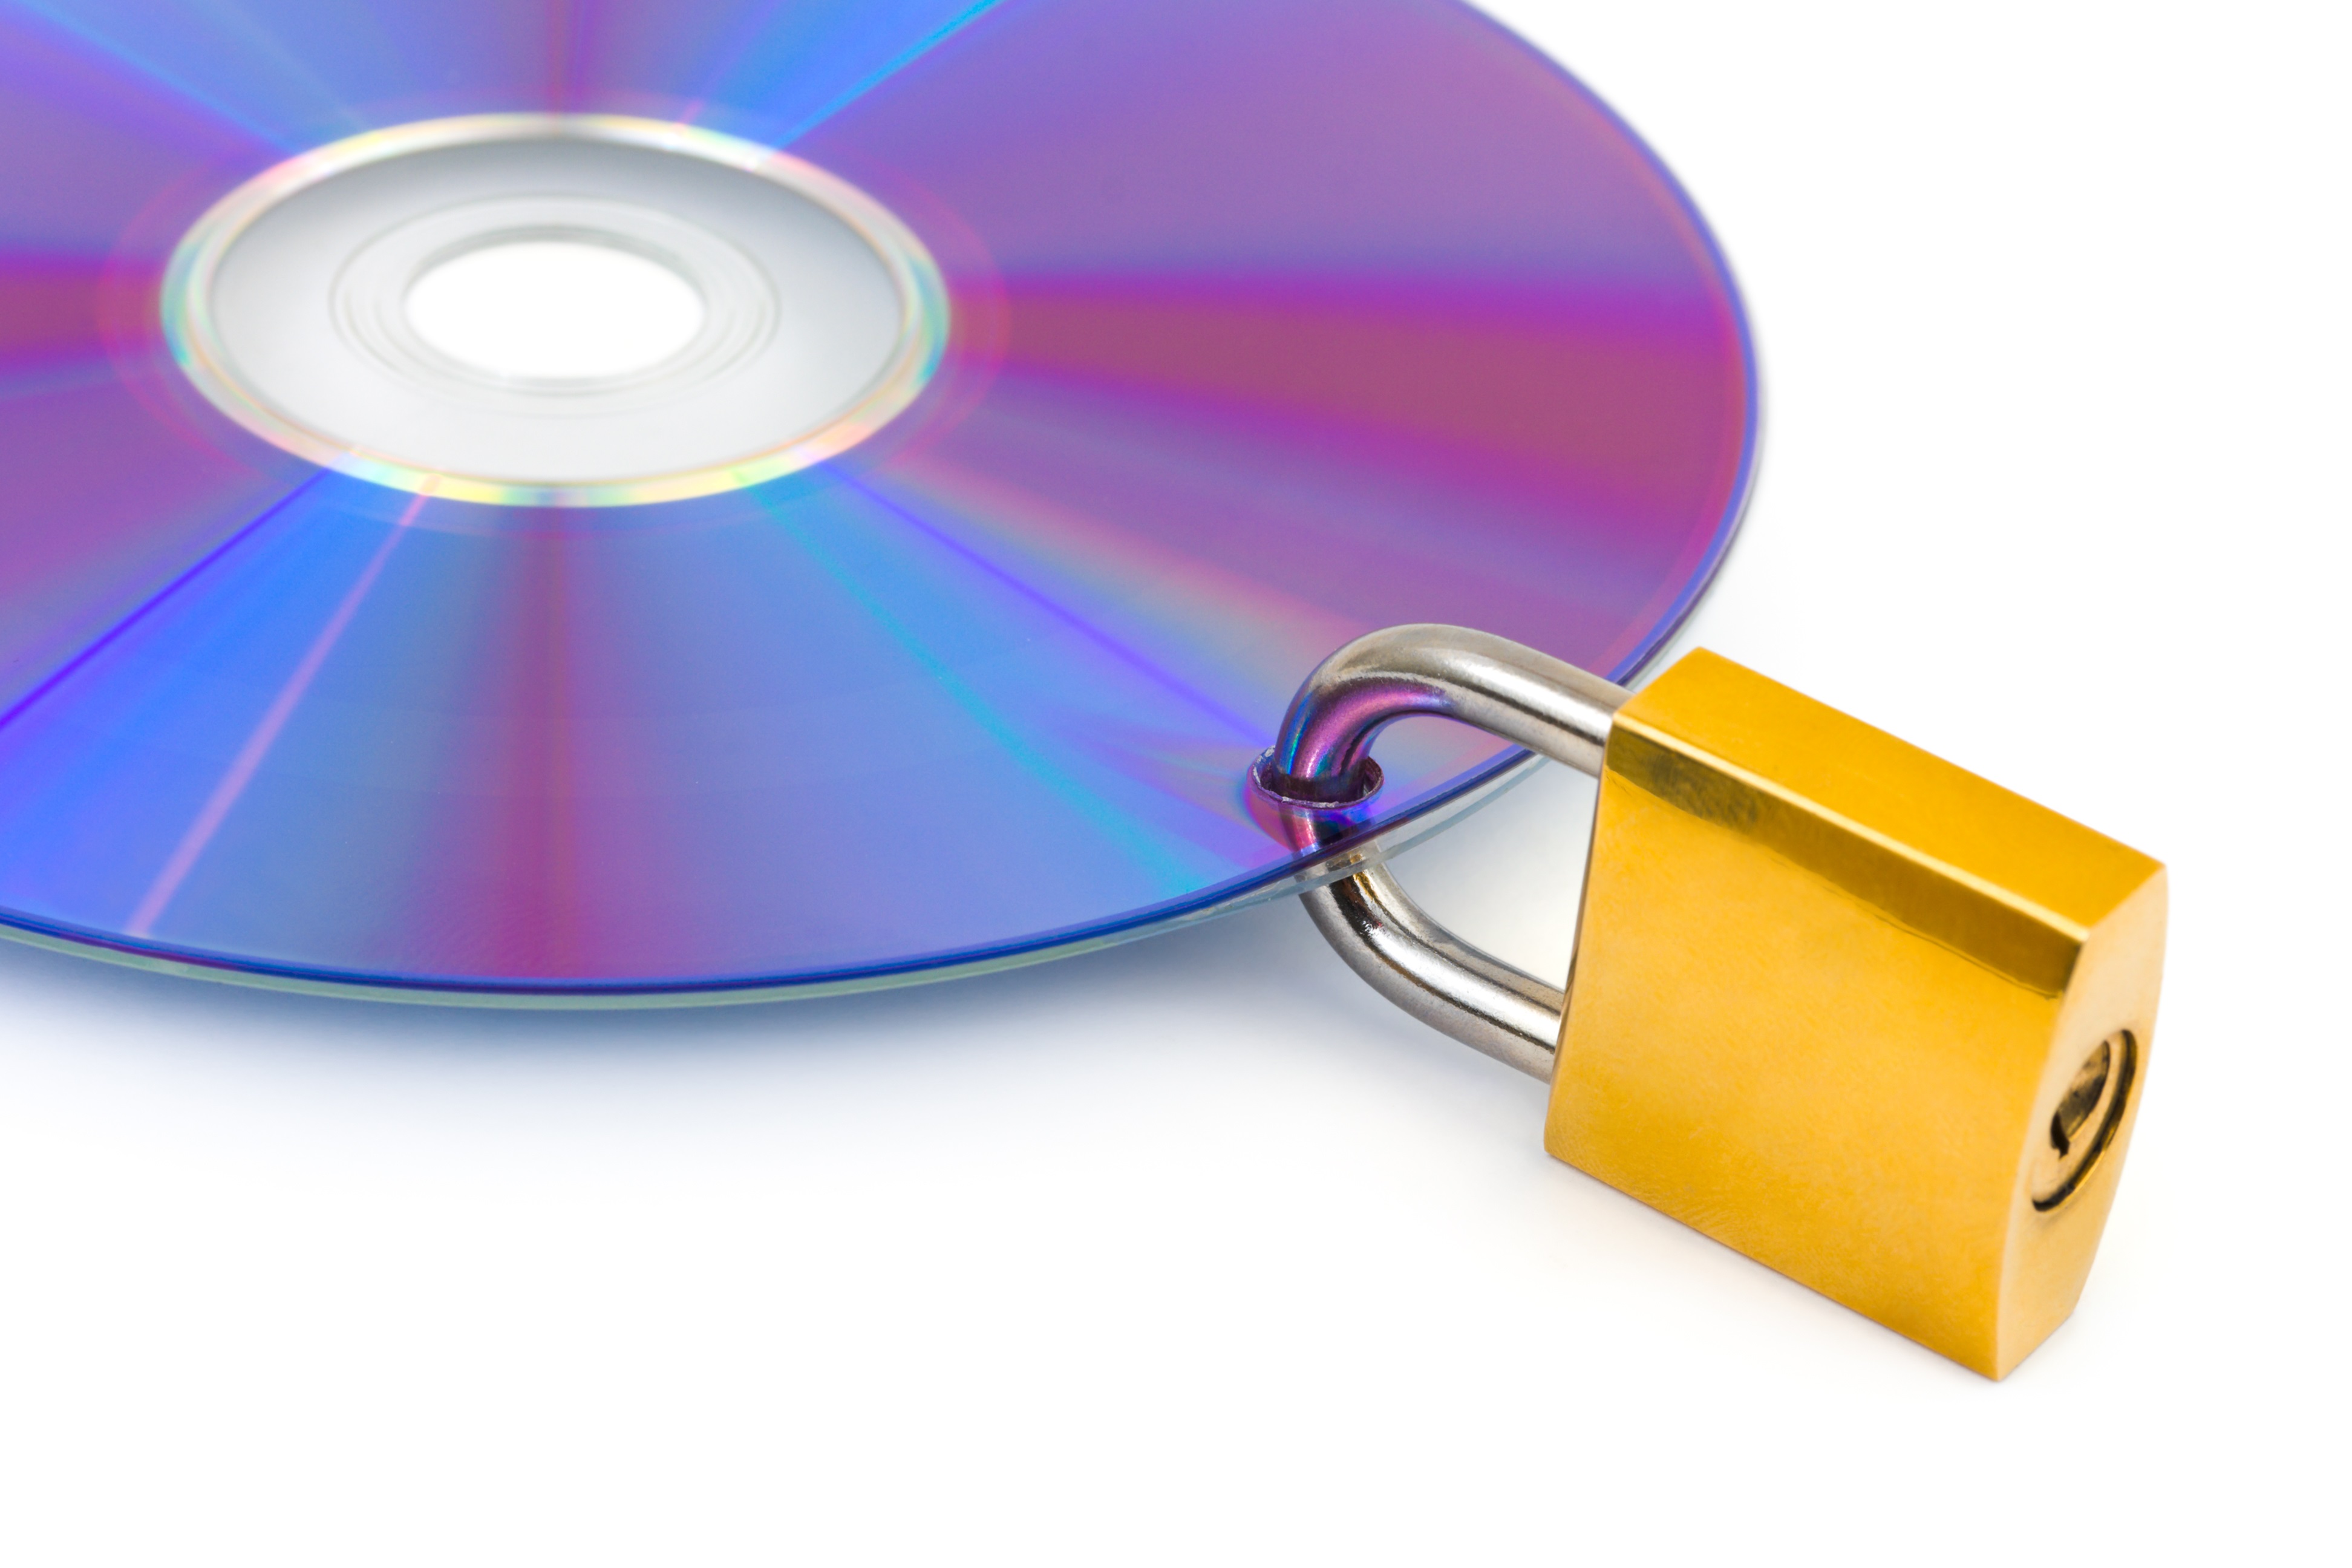 DVD with a padlock, illustrating PCB intellectual property.